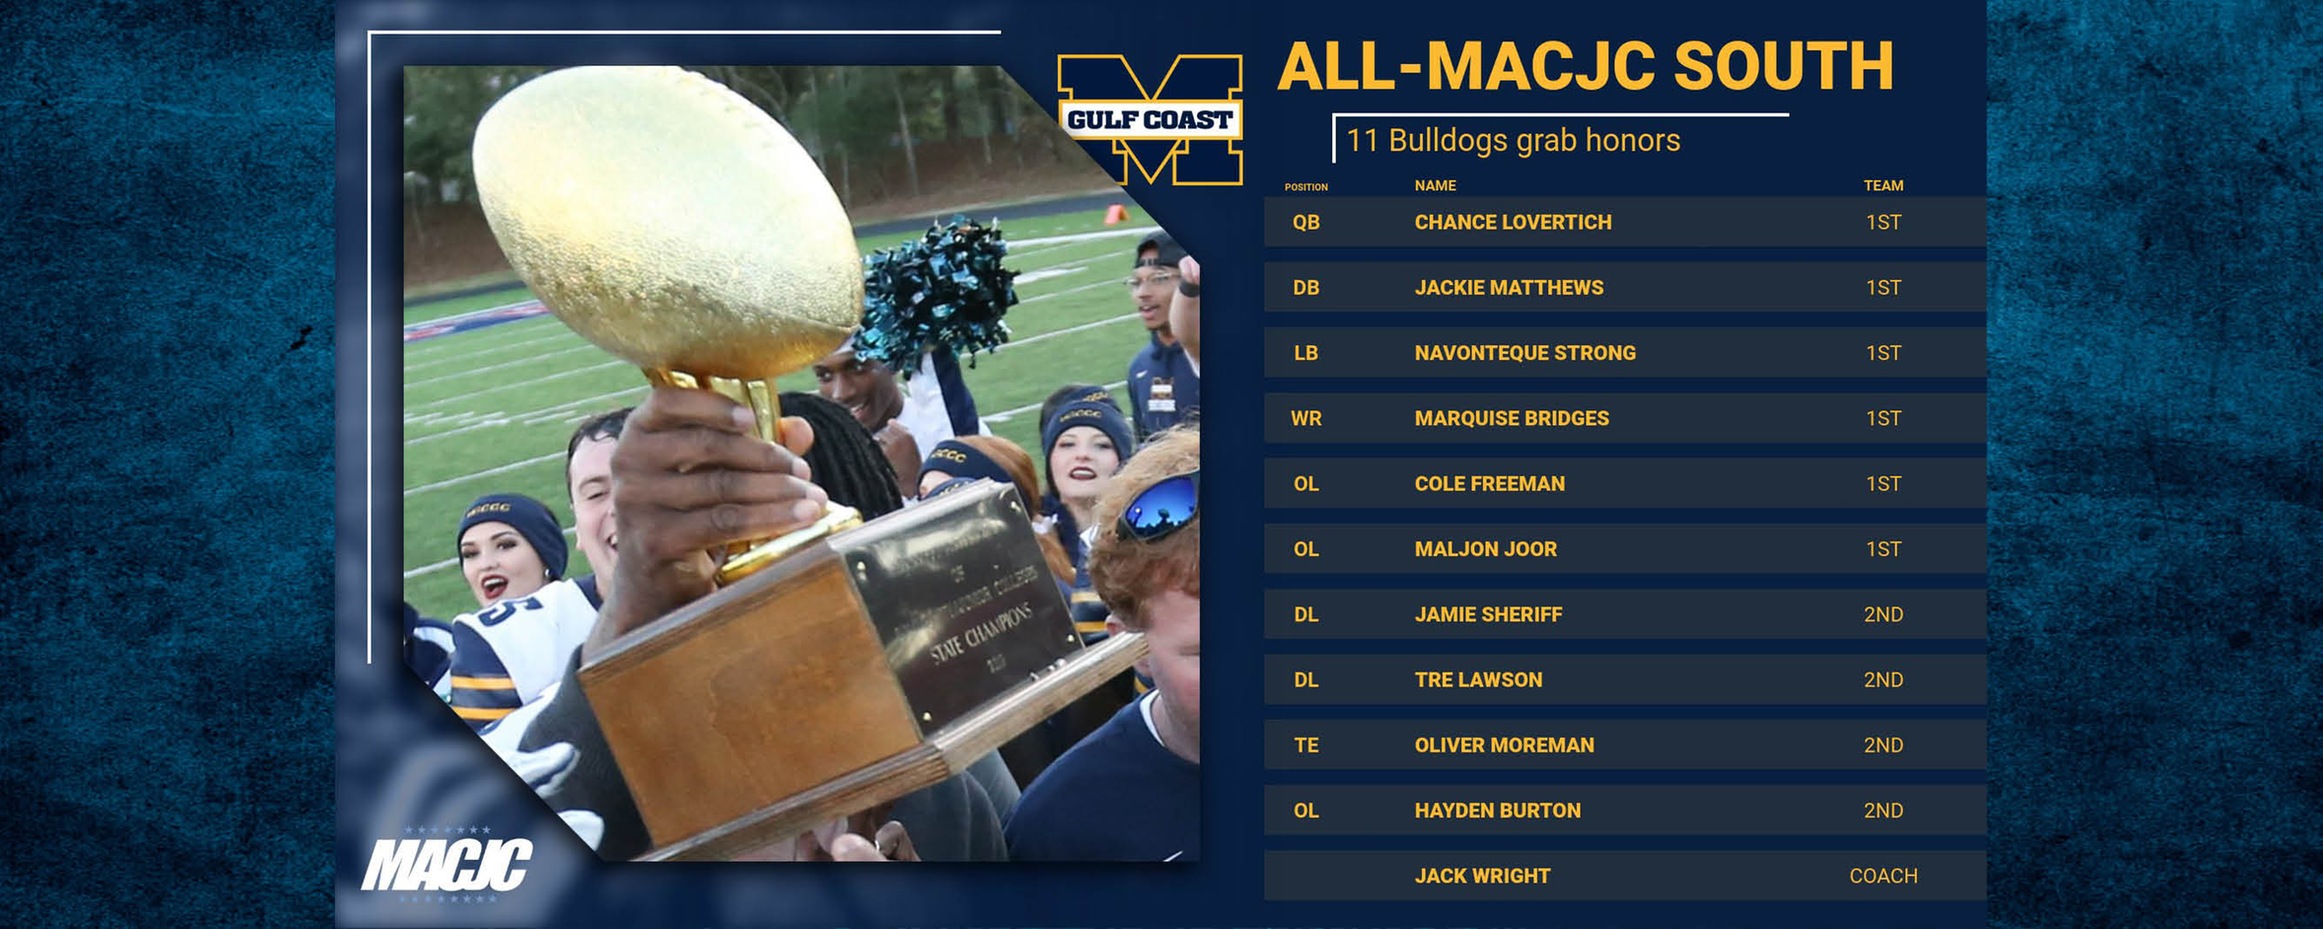 11 pick up All-MACJC South honors